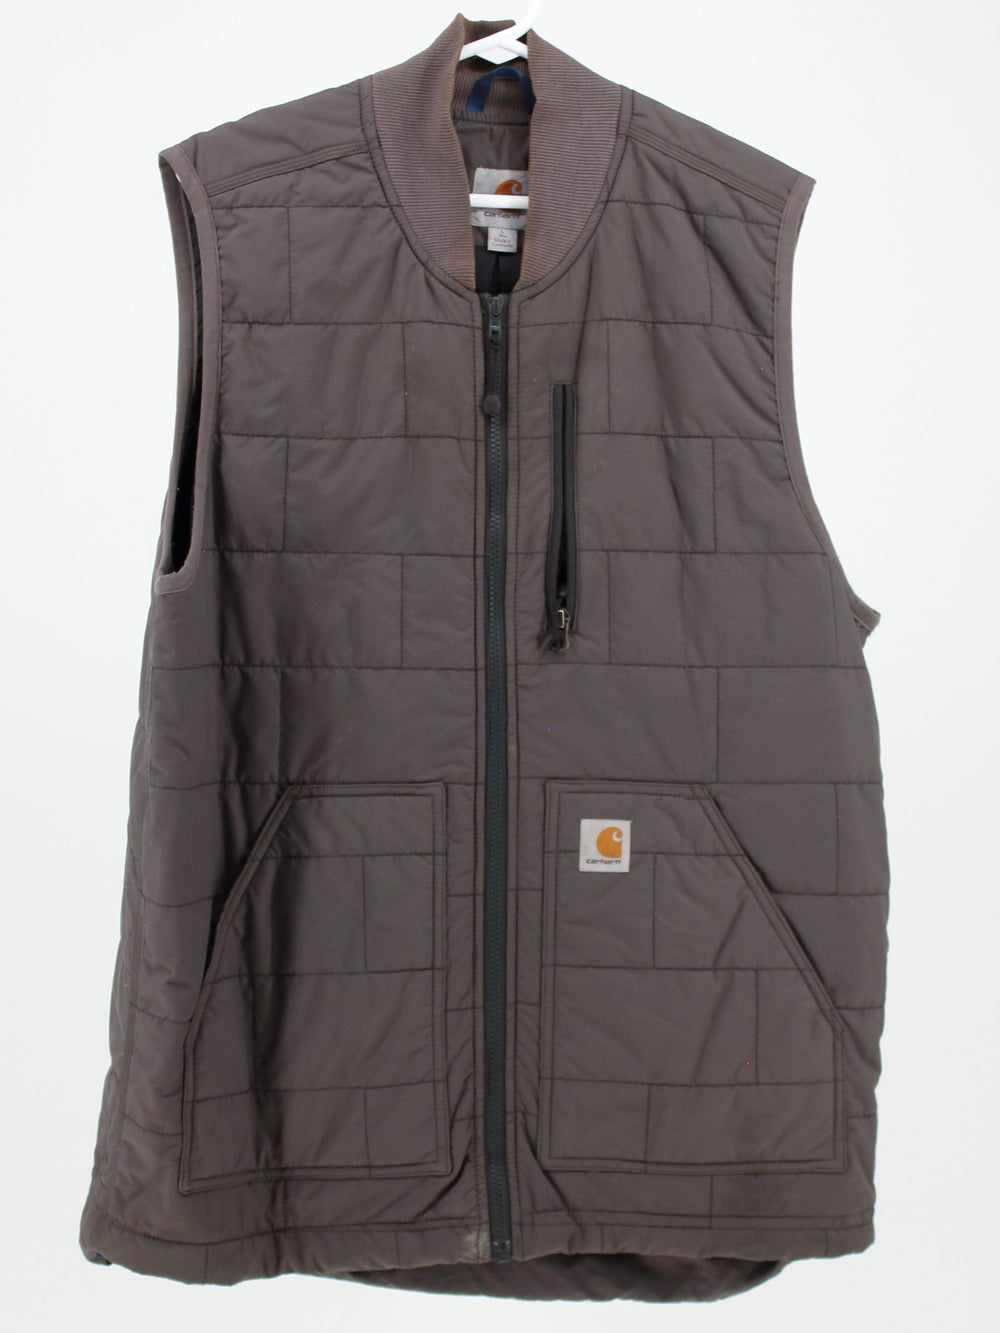 Carhartt Brown Quilted Vest with 3 front pockets